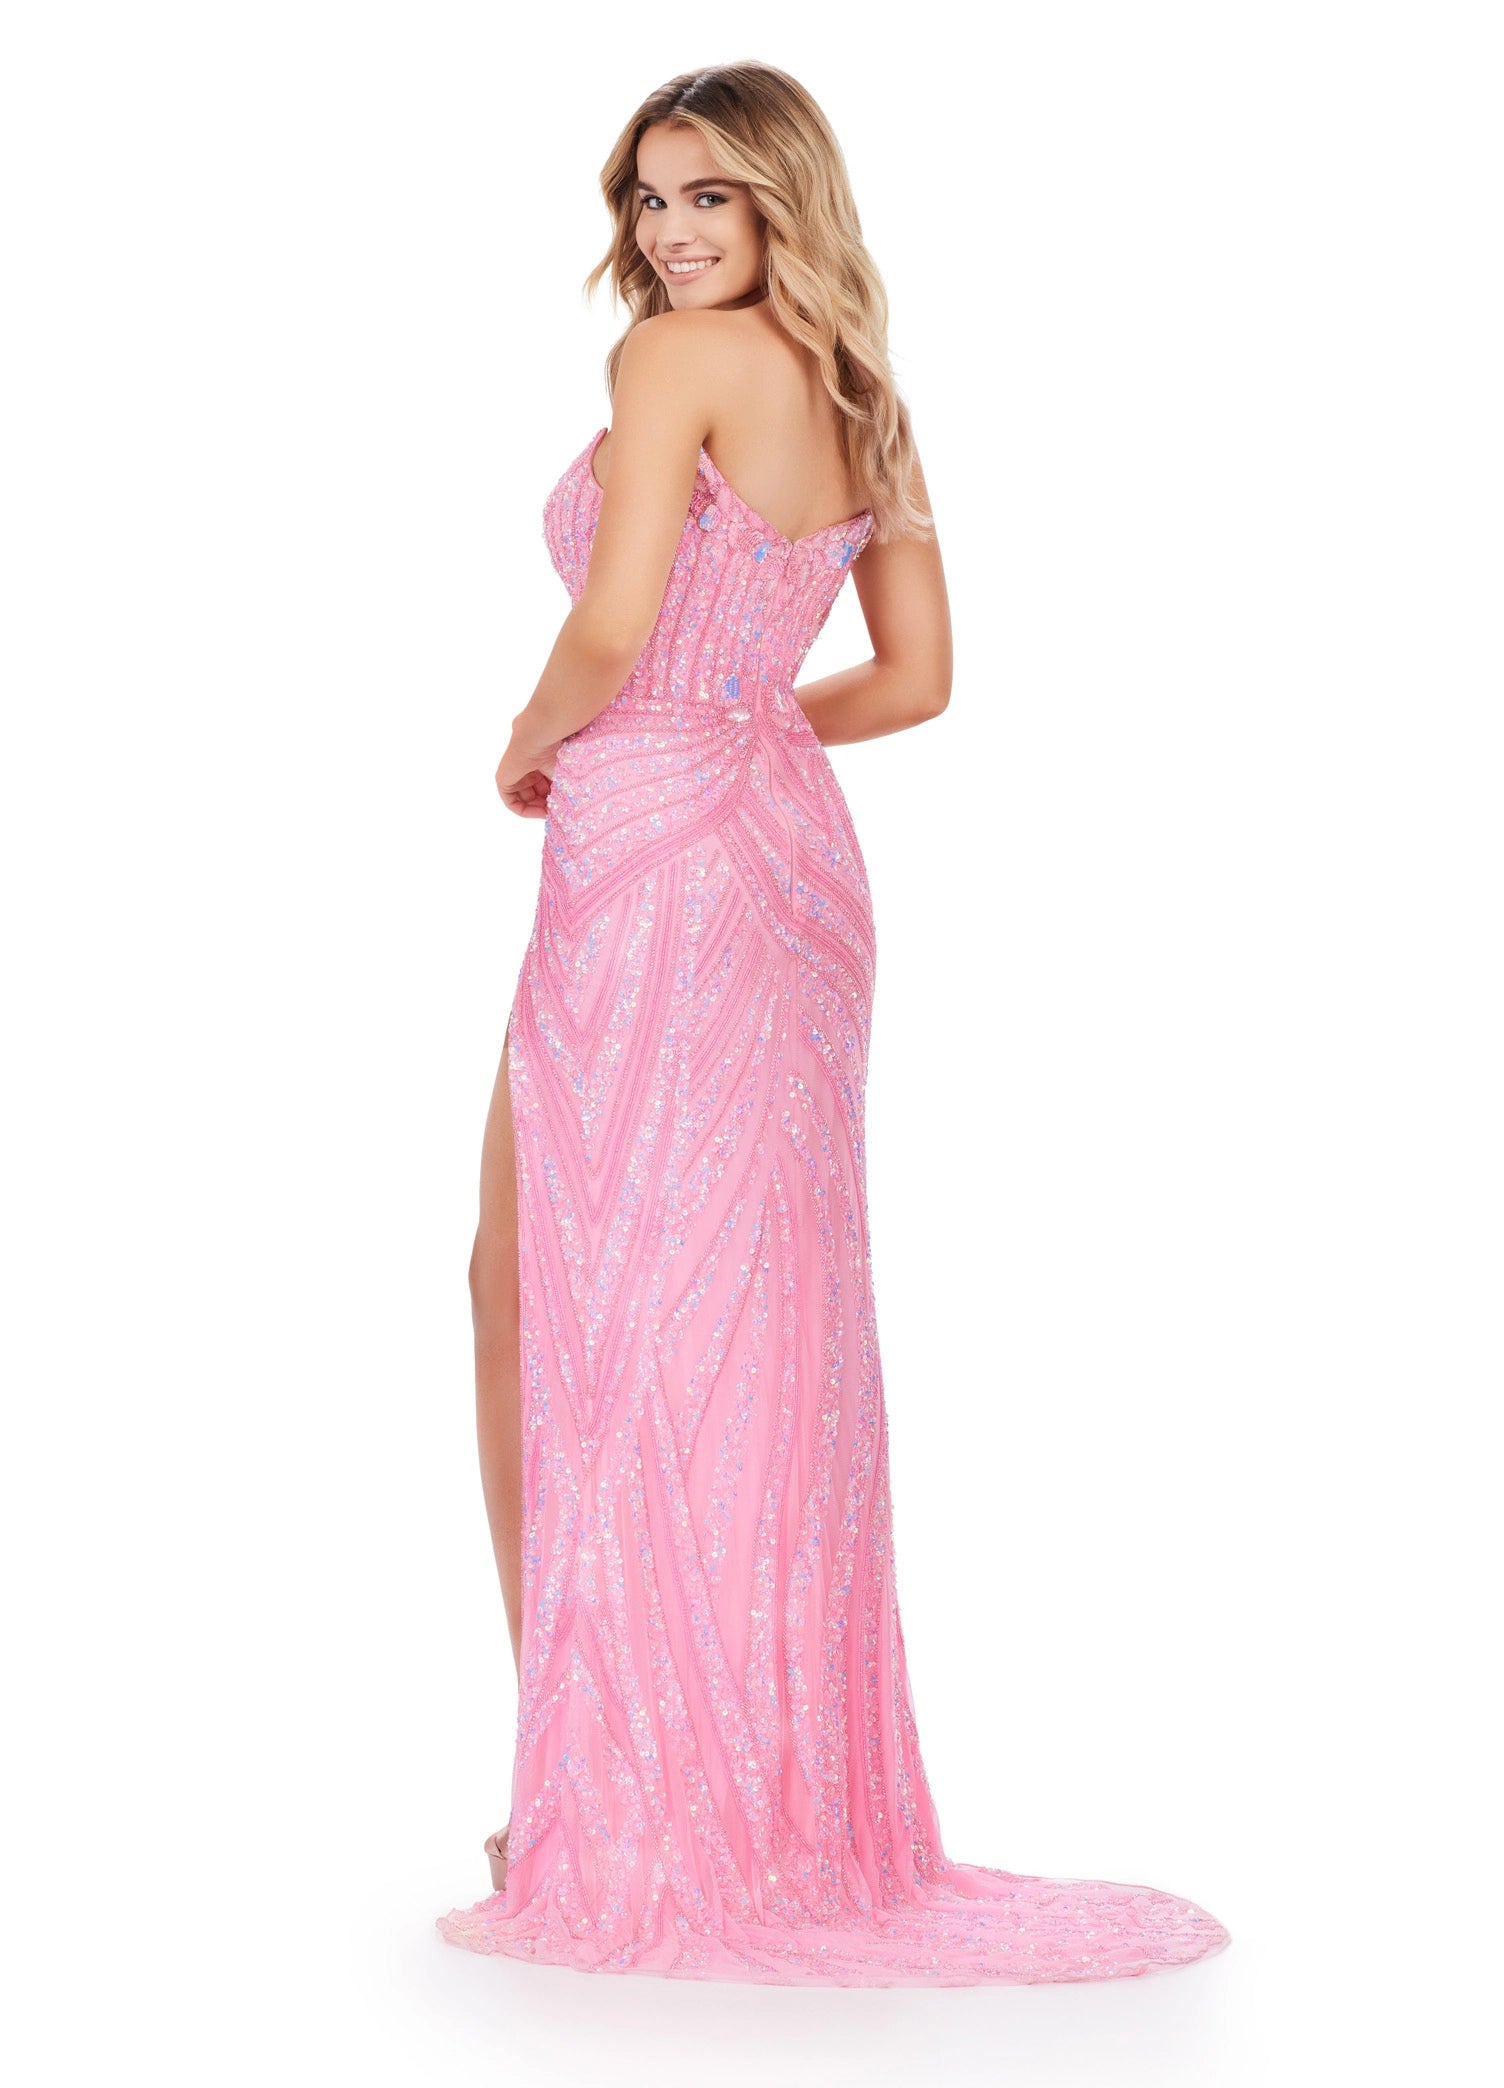 Ashley Lauren 11236 Long Fitted V Neck Slit Beaded Sequin Prom Dress Pageant Gown This strapless gown is sure to turn heads. The sweetheart neckline is complete with a modern floral sequin motif that continues down the bustier and skirt. The skirt is complete with a left leg slit.  COLORS: Blue/Jade, Candy Pink, Gold/Black, Lilac, Sky, Silver/Nude, Electric Lime, Bright Pink, Sky/Nude, Coral, Silver/Ivory, Turquoise/Royal, Rose Gold, Gold/Ivory, Red, Gold Sizes: 00-16